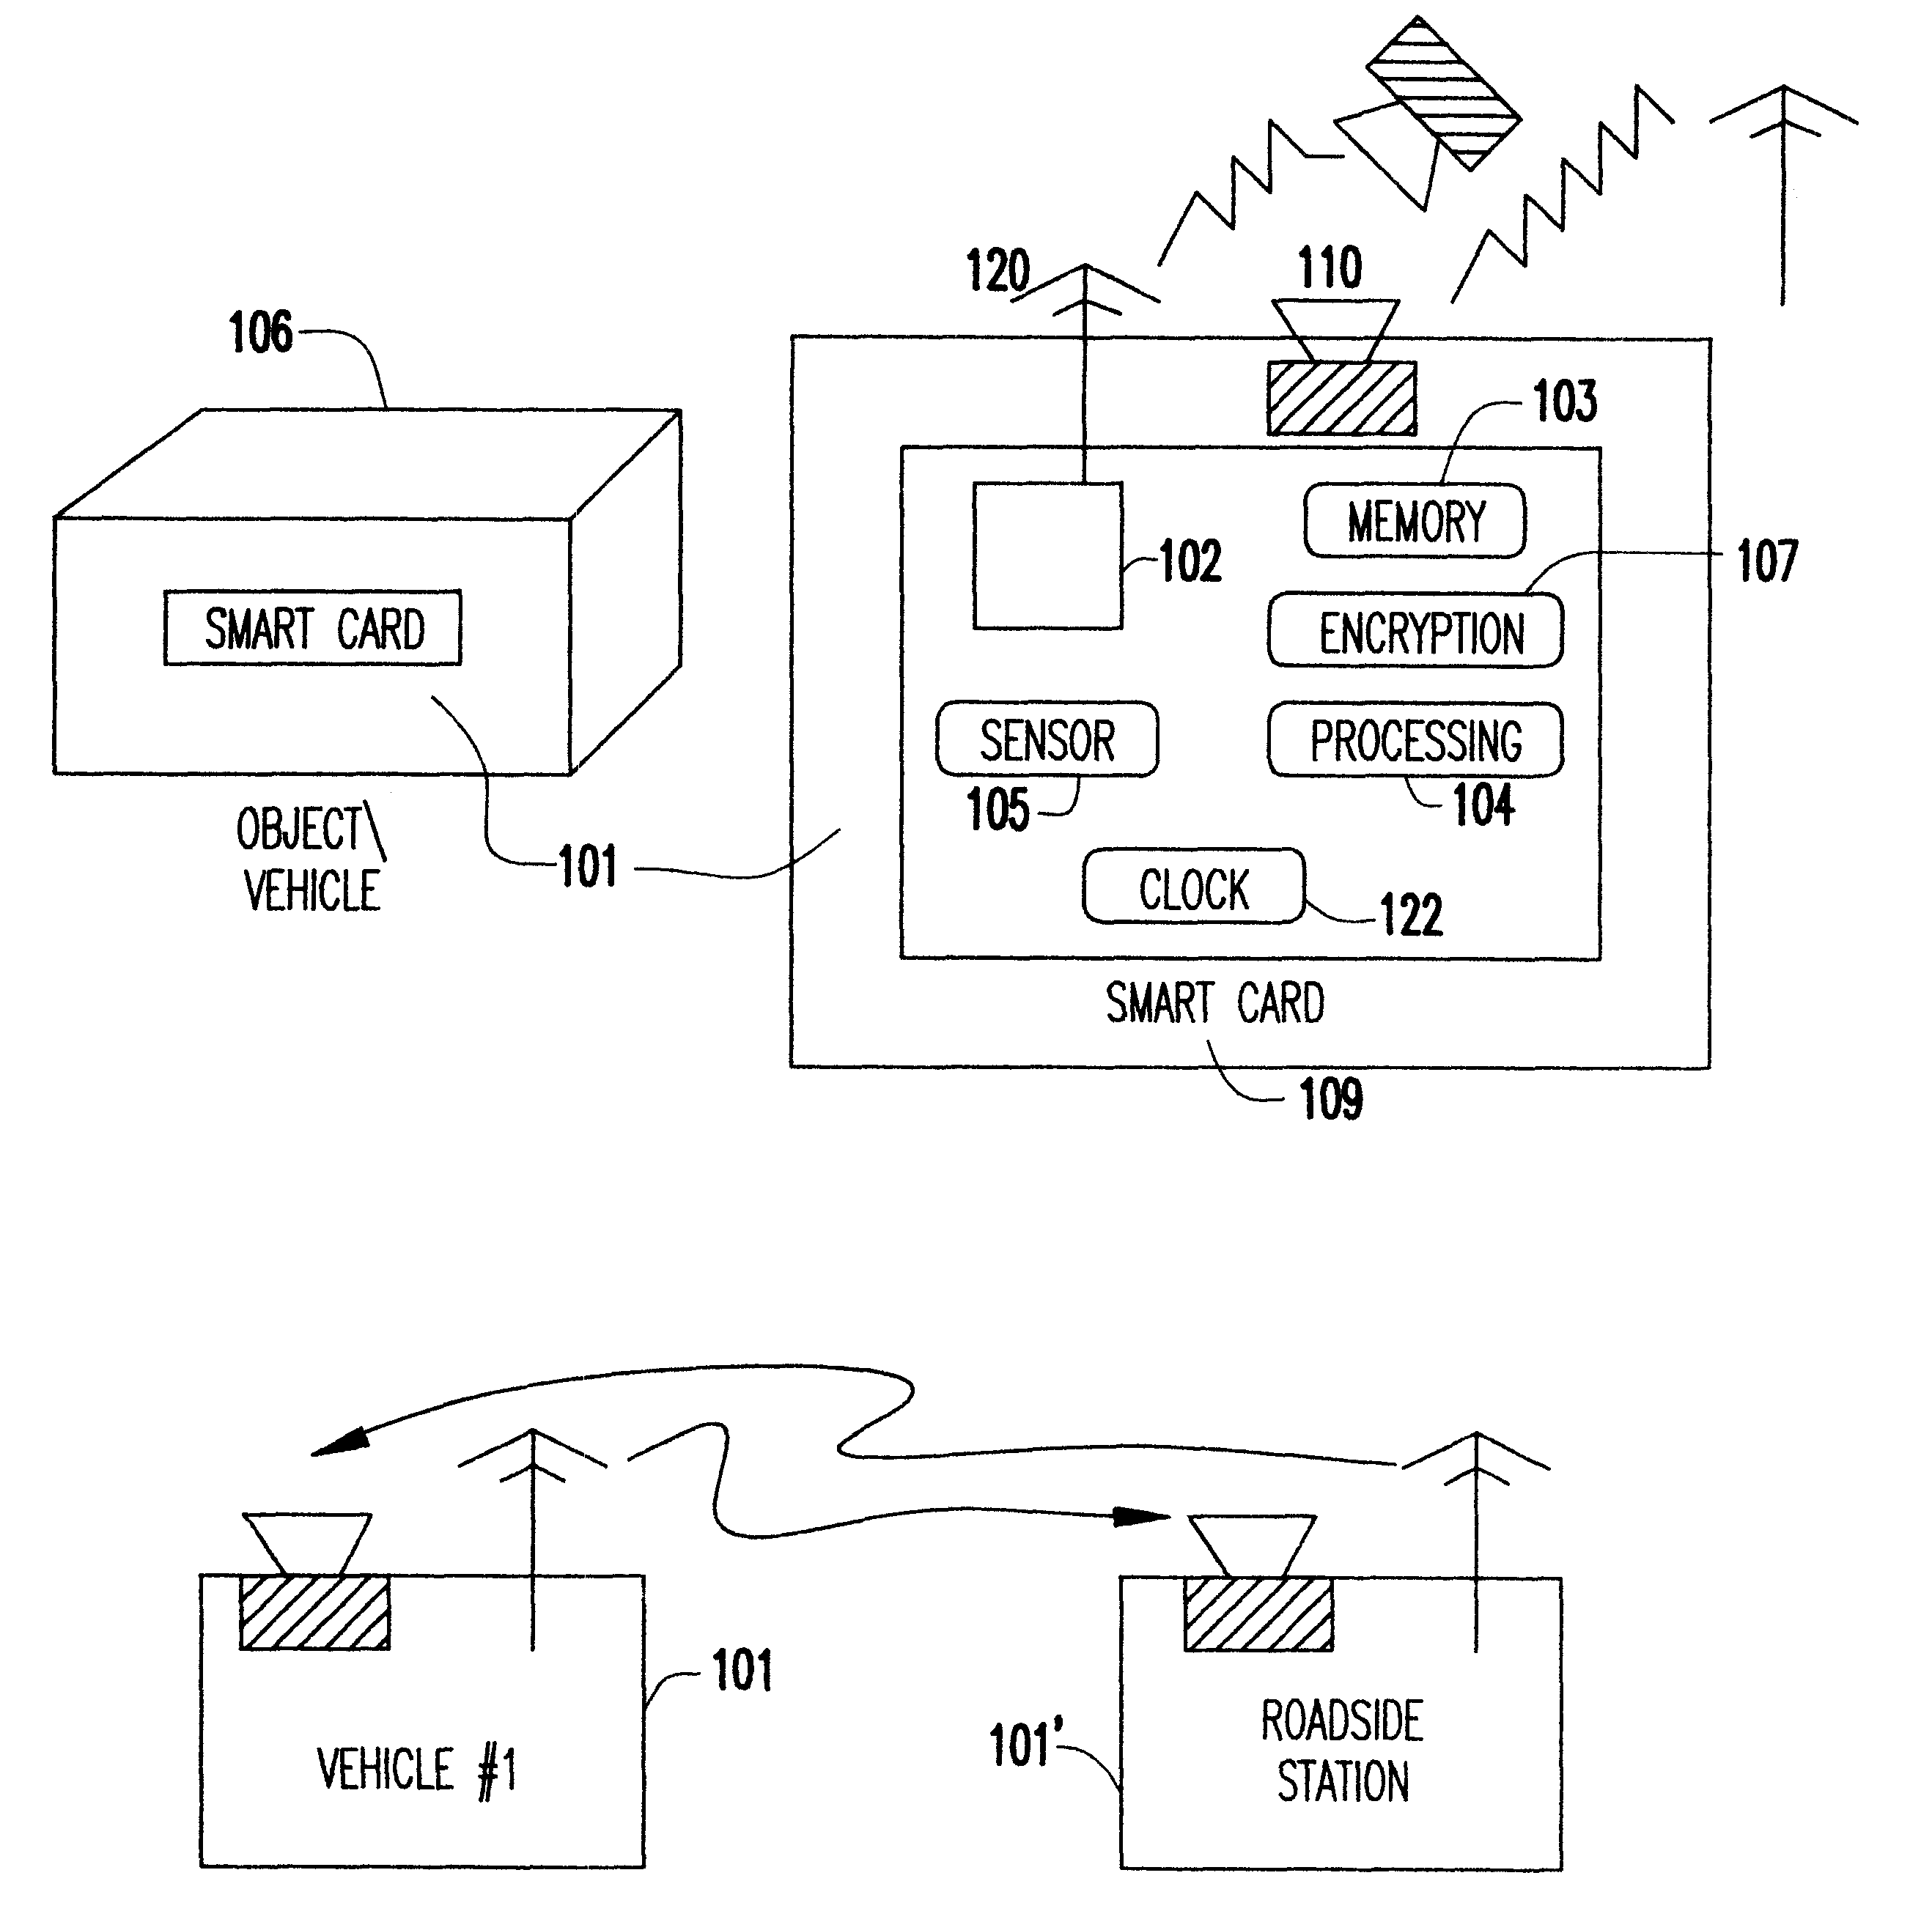 Event-recorder for transmitting and storing electronic signature data